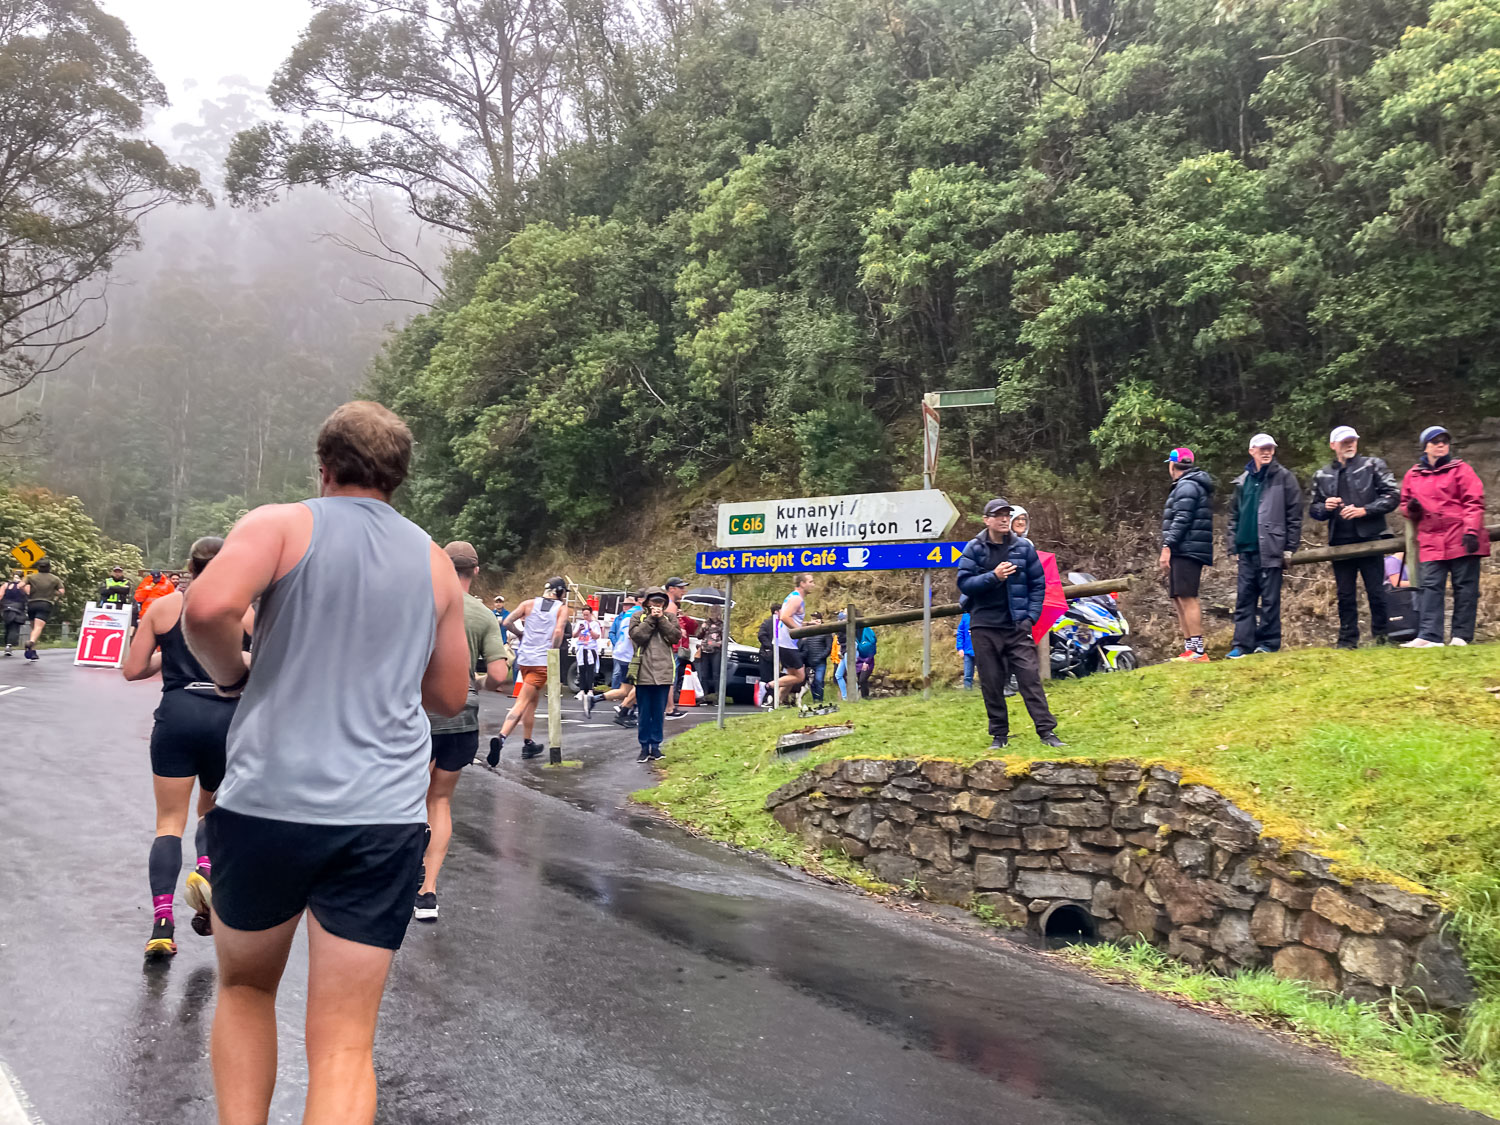 A group of walkers approaching a turn off to kunanyi/Mt Wellington in the mist